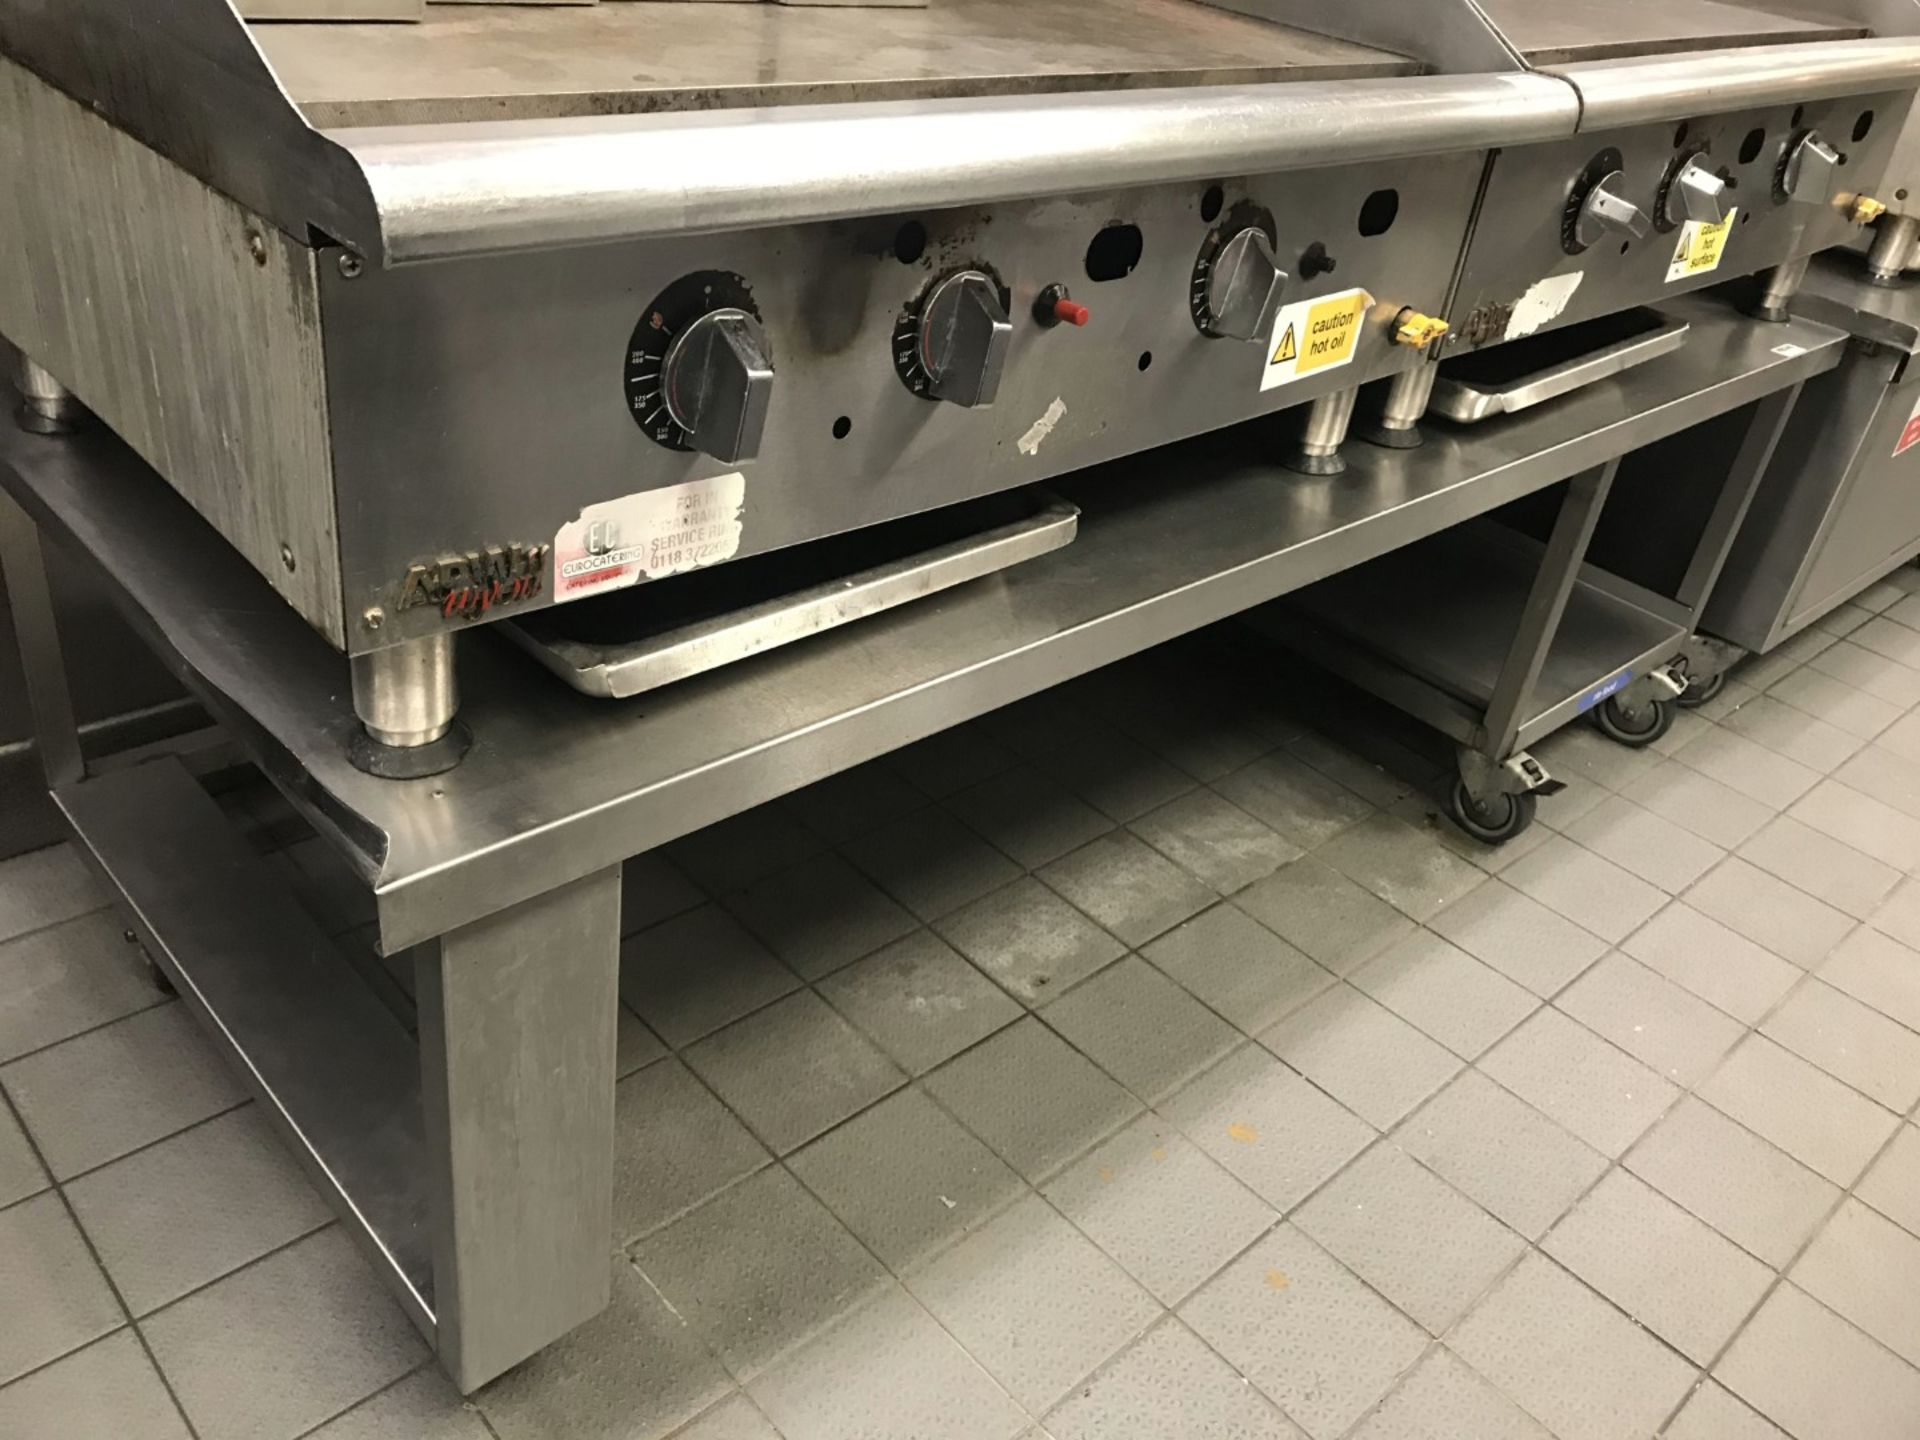 2 x APW Wyott Heavy Duty Countertop Griddles With Stand on Castors - Each Griddle Size W92 x D65 cms - Image 6 of 11